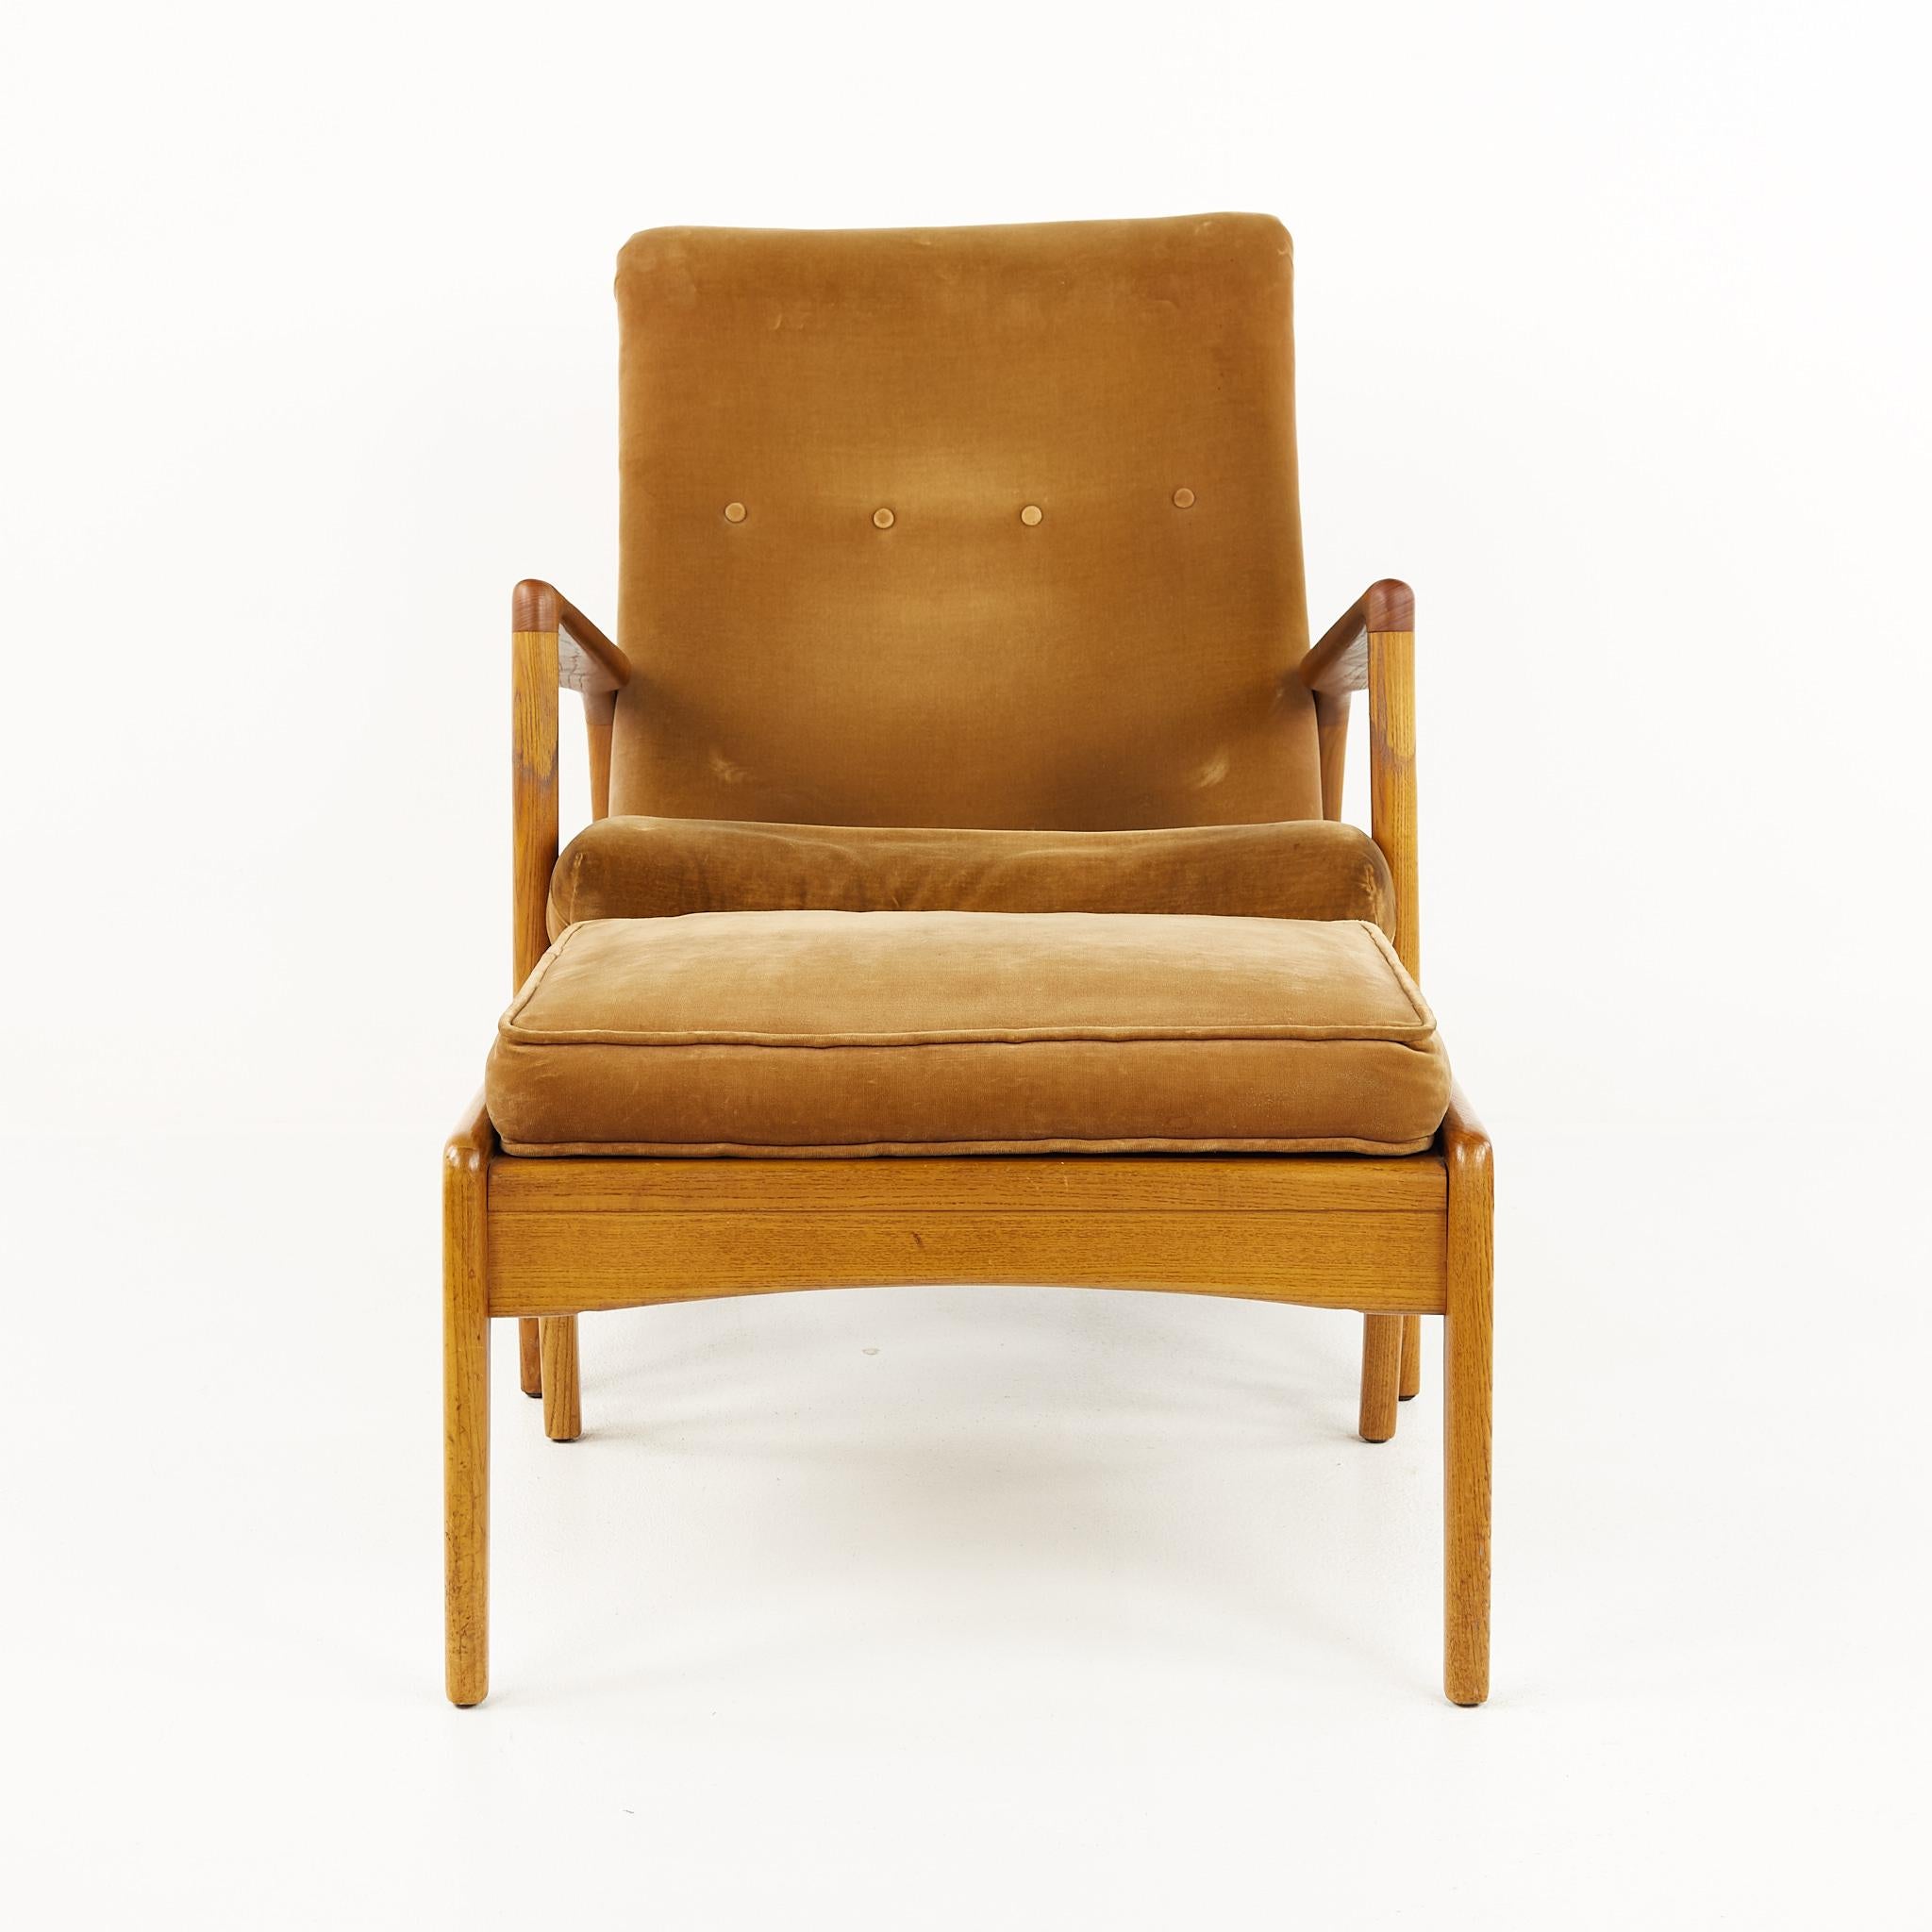 Kofod Larsen mid century highback lounge chair and ottoman

This chair measures: 27.5 wide x 32 deep x 32.5 inches high, with a seat height of 16 and arm height of 23.5 inches

Ready for new upholstery. This service is available for an